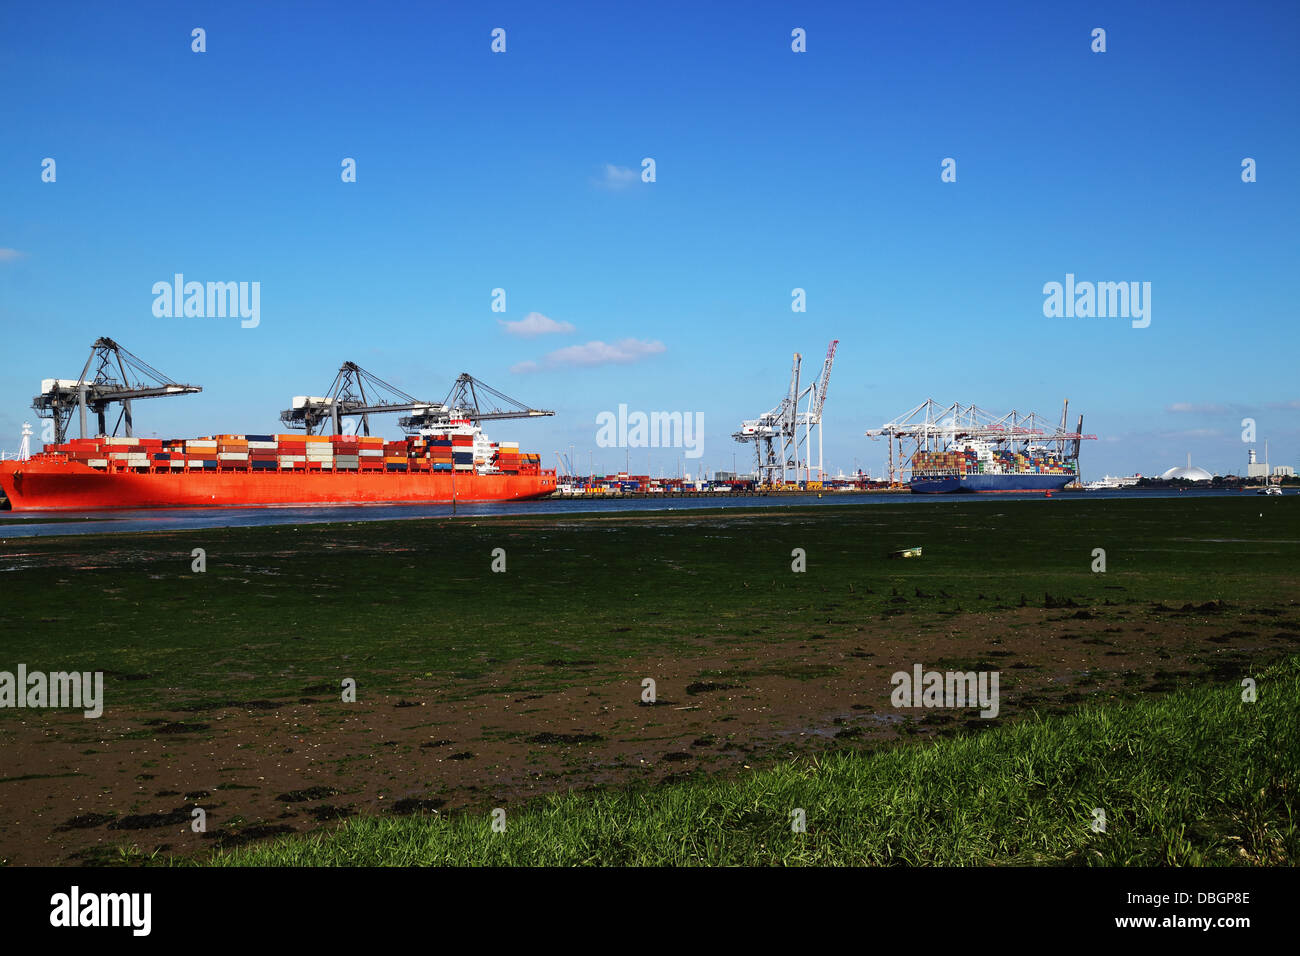 Container shipping dock with 2 cargo ships Stock Photo